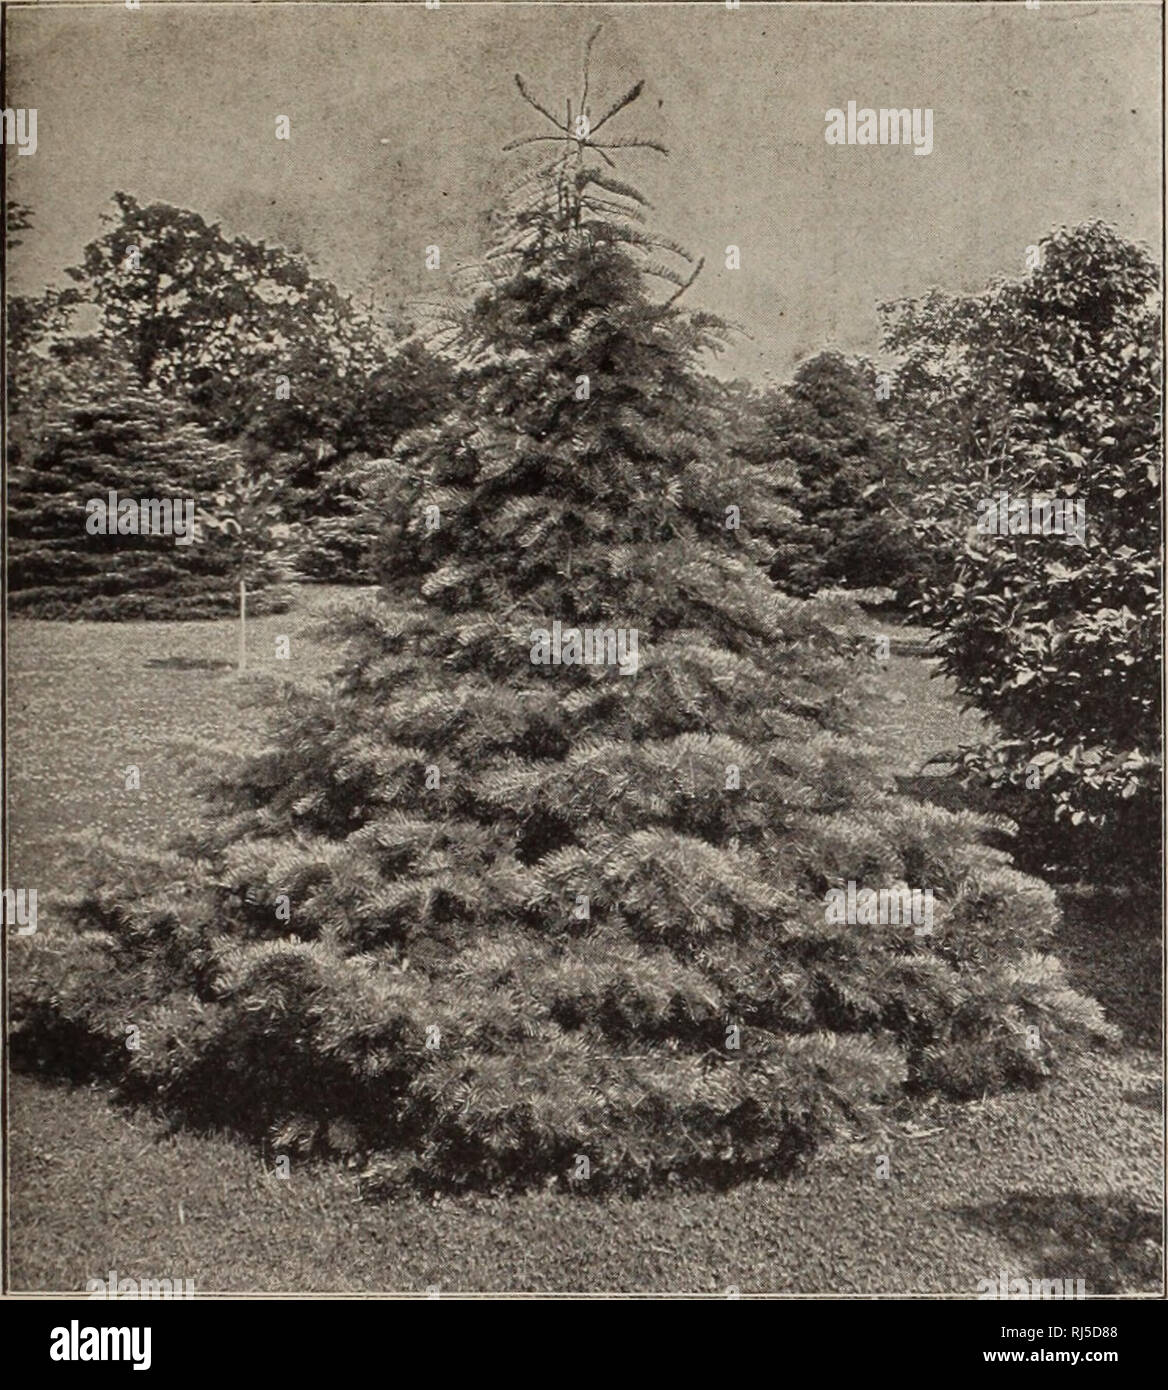 . Choice hardy trees and plants / F.W. Kelsey Nursery Company.. Nursery Catalogue. Choice Trees, Shrubs and Hardy Plants. 21. PiCEA CONCOLOE. CONCOIiOR PICEA balsamea. Balm of Gilead Fie. Very hardy; foliage silvery underneath. 50 cts. to $1. PICEA Cephalonica. Cephalonian Fie. Sil- very dagger-shaped leaves. $1.50 to $2. PICEA concolor or lasiocarpa. Concoloe Spbuce. One of the hardiest and most beauti- ful Evergreens. Tree of graceful, stately habit. Large, broad, silvery green foliage. A rare and exceedingly choice variety. $'i to $5. PICEA concolor violacea. Silver Fie. Leaves similar in s Stock Photo